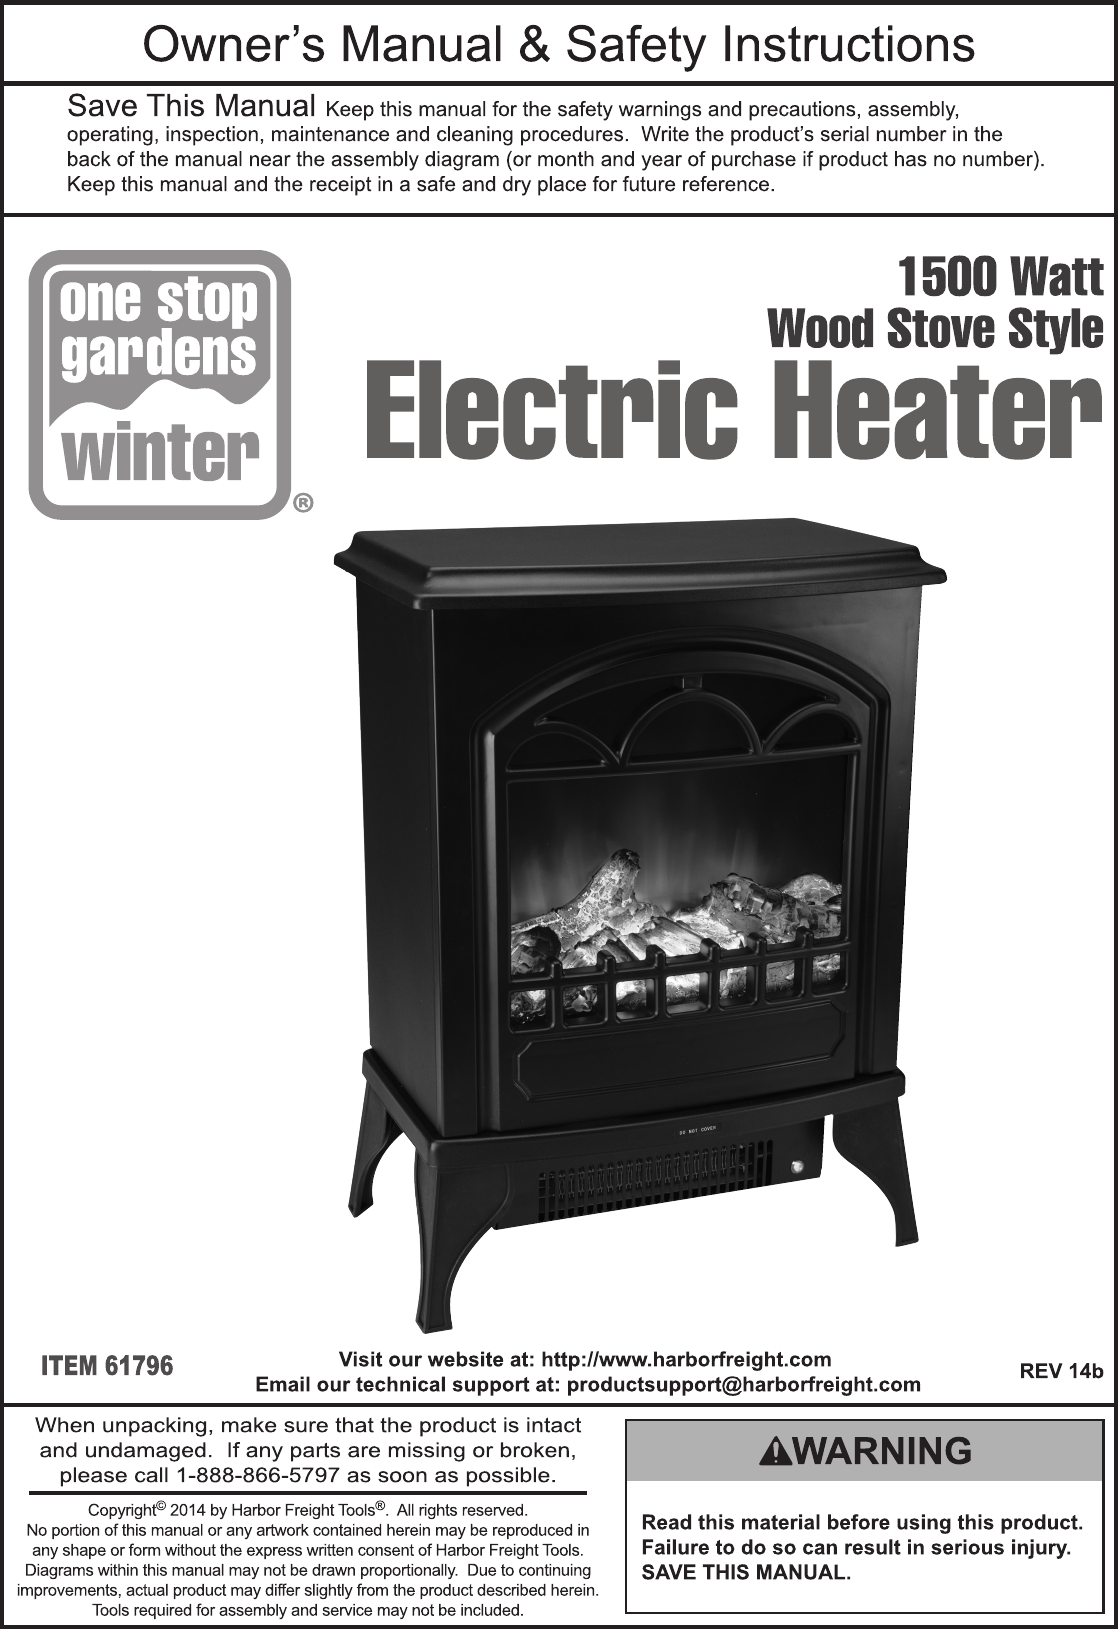 Page 1 of 12 - Harbor-Freight Harbor-Freight-750-1500-Watt-Wood-Stove-Style-Electric-Heater-Product-Manual-  Harbor-freight-750-1500-watt-wood-stove-style-electric-heater-product-manual